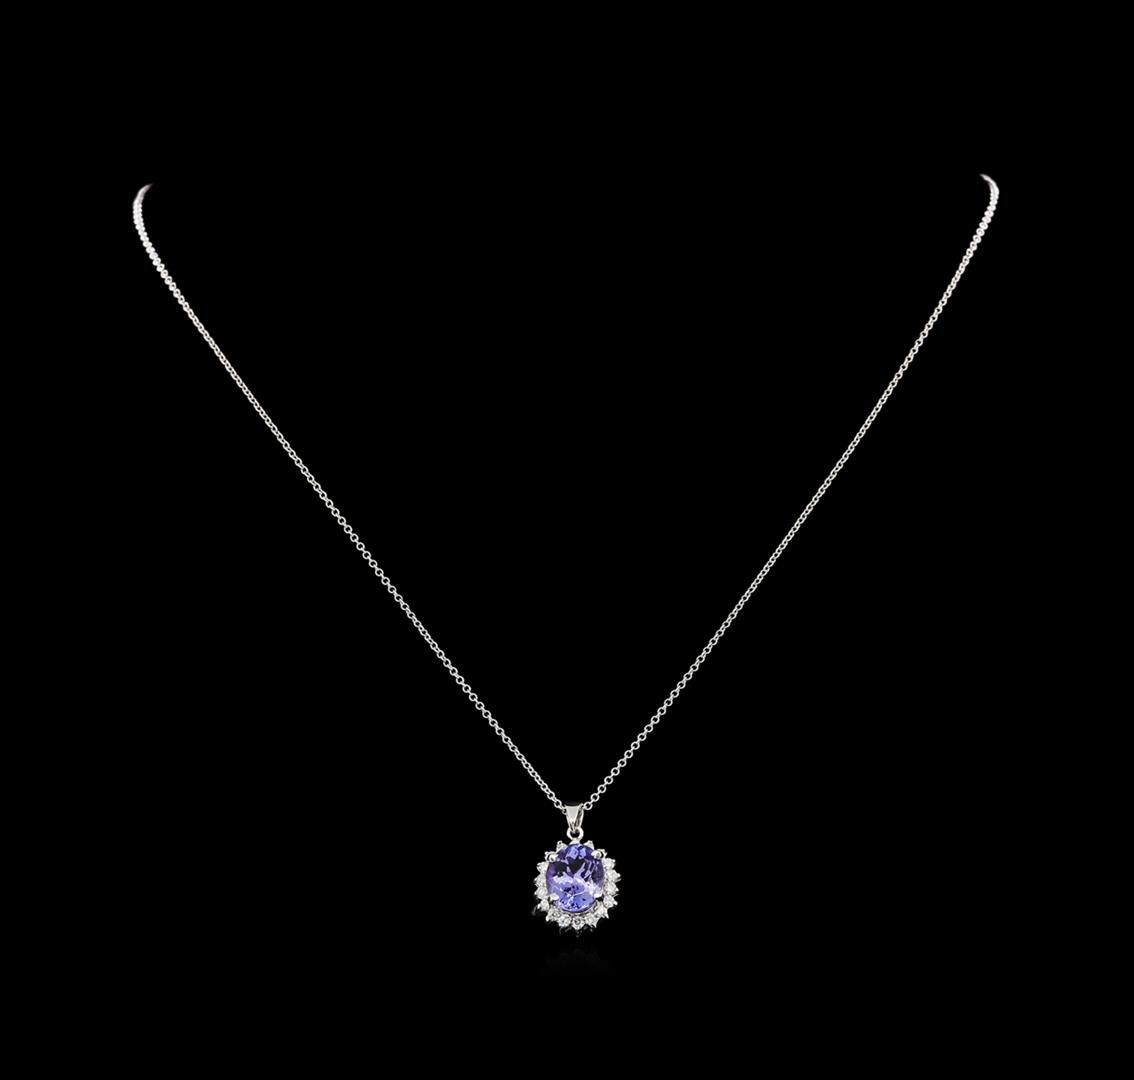 3.05 ctw Tanzanite and Diamond Pendant With Chain - 14KT White Gold